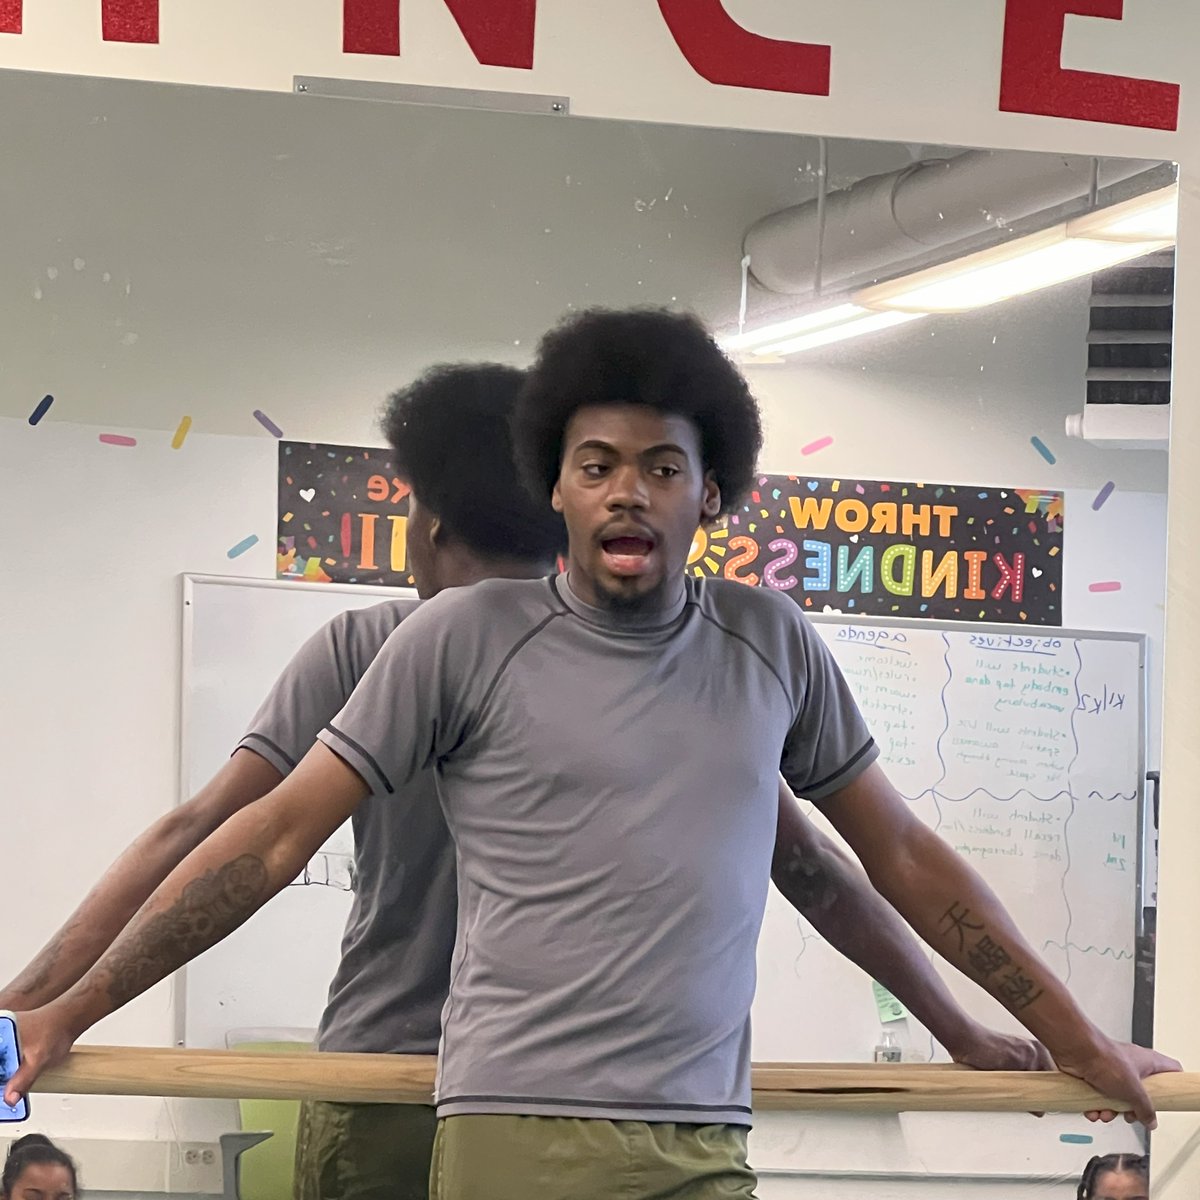 We visited Arts for Learning MA at the Ellis Elementary to check out their 3rd grade dance class. Students are studying the art and culture of hip-hop, including moves bounce, rock, and slide. #bpsarts4all #artsed